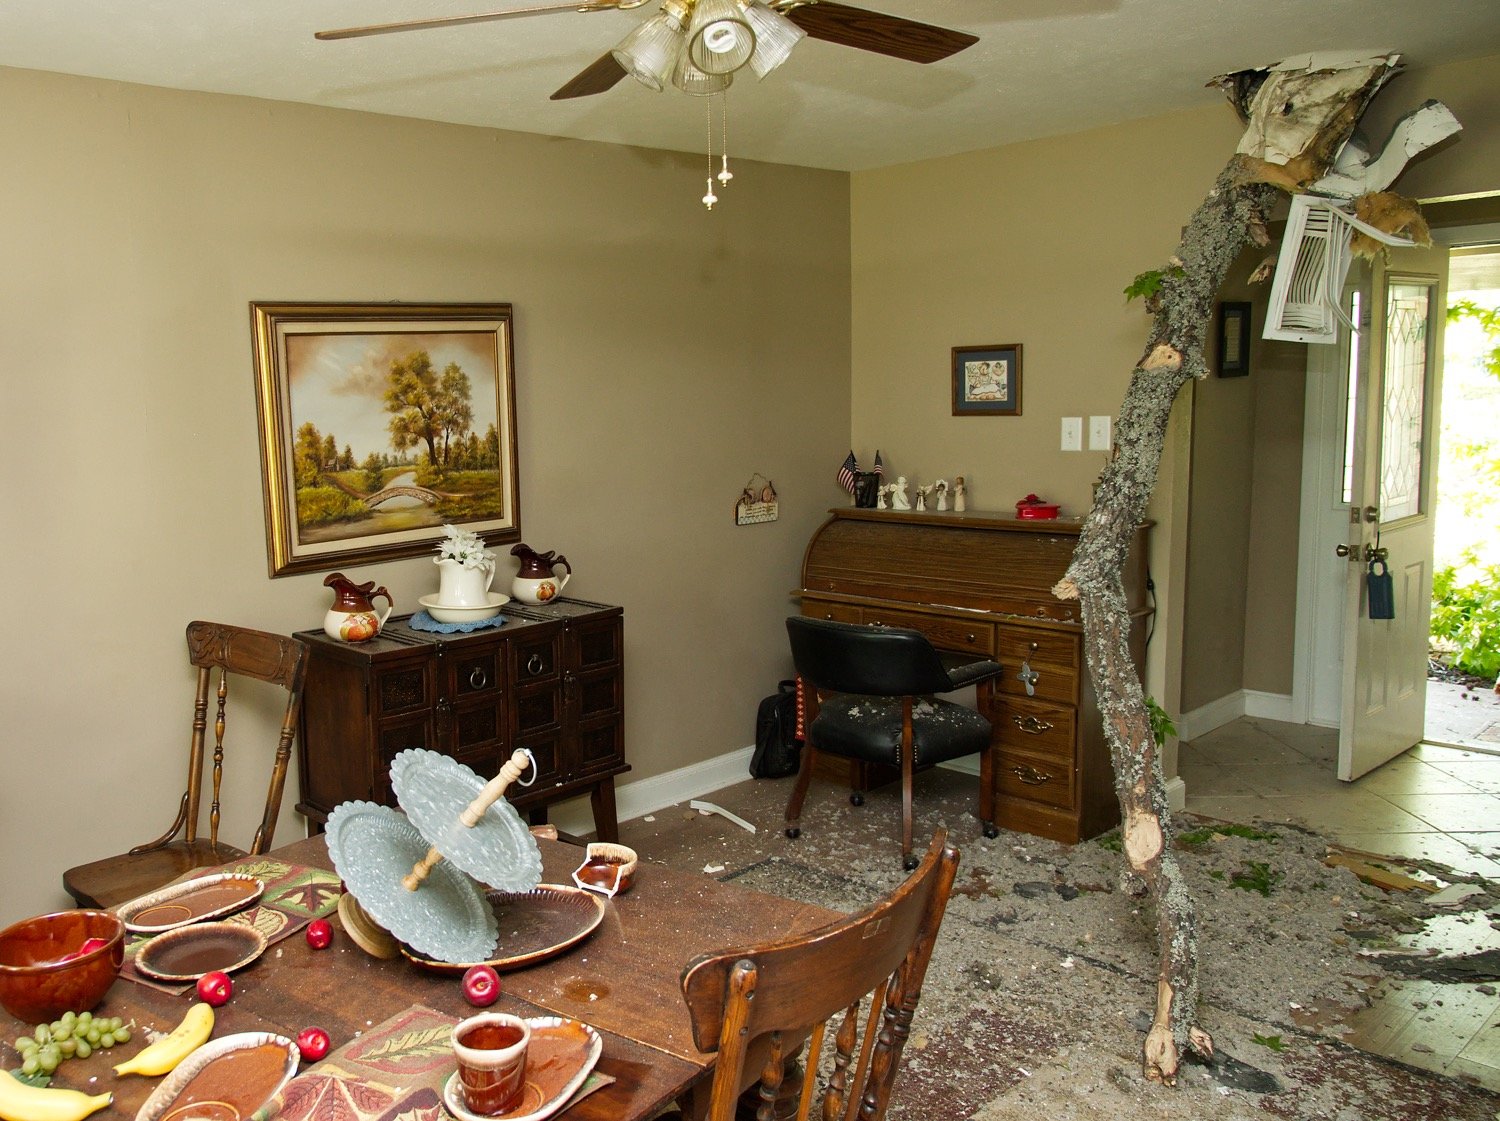 A tree limb displaced the dining room of this home on McDonald Street, moving a large table and chairs several feet, into the opposite wall.